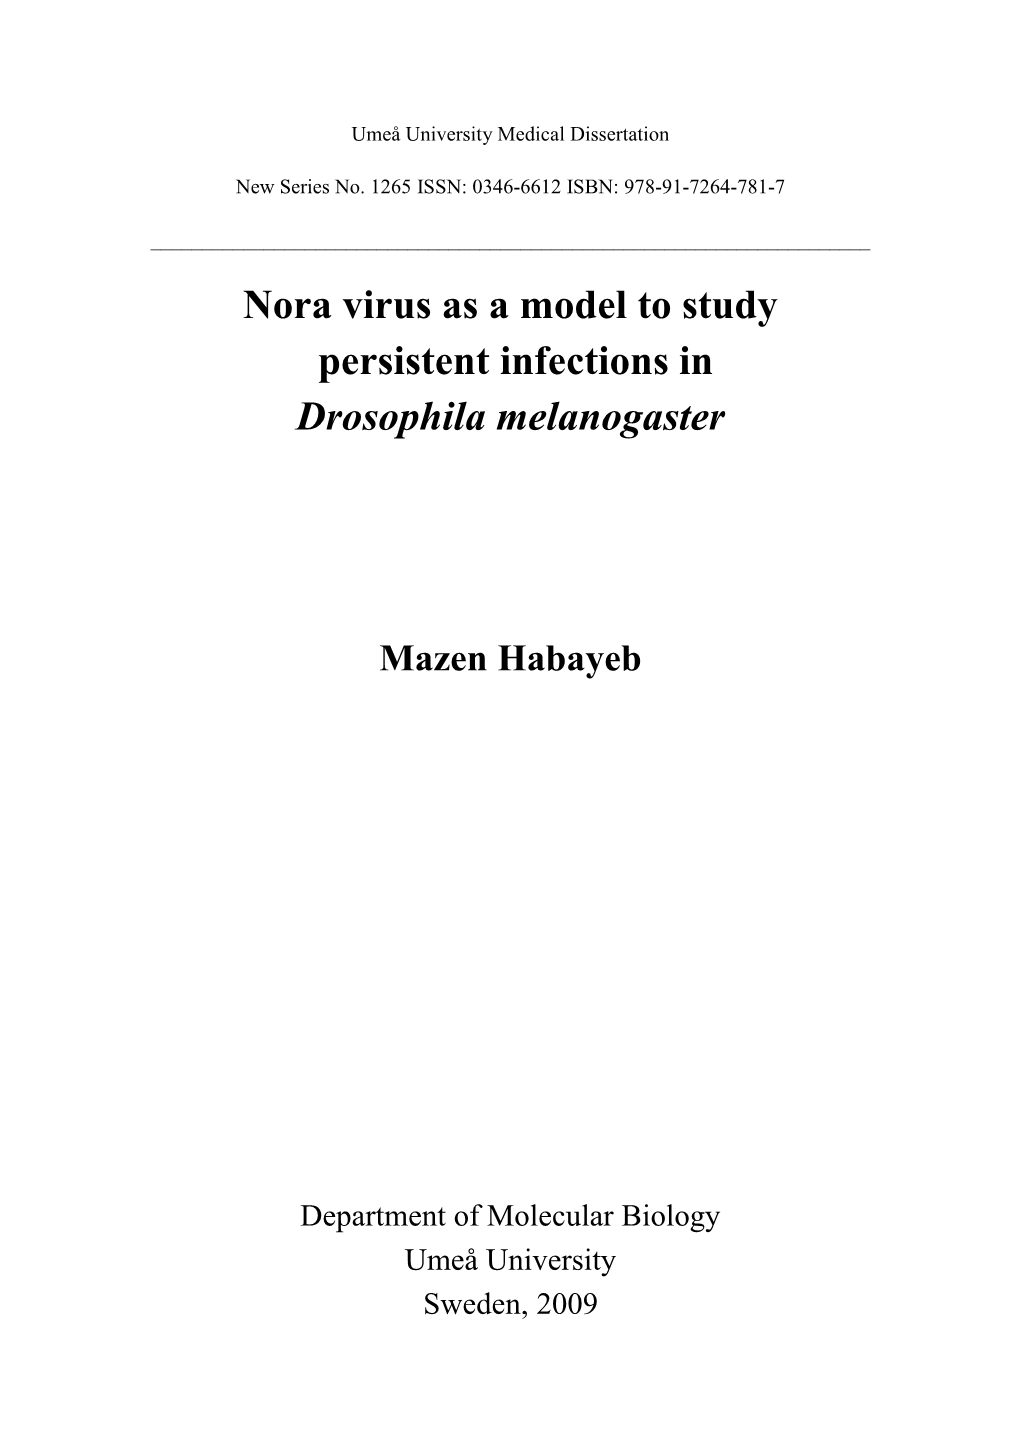 Nora Virus As a Model to Study Persistent Infections in Drosophila Melanogaster